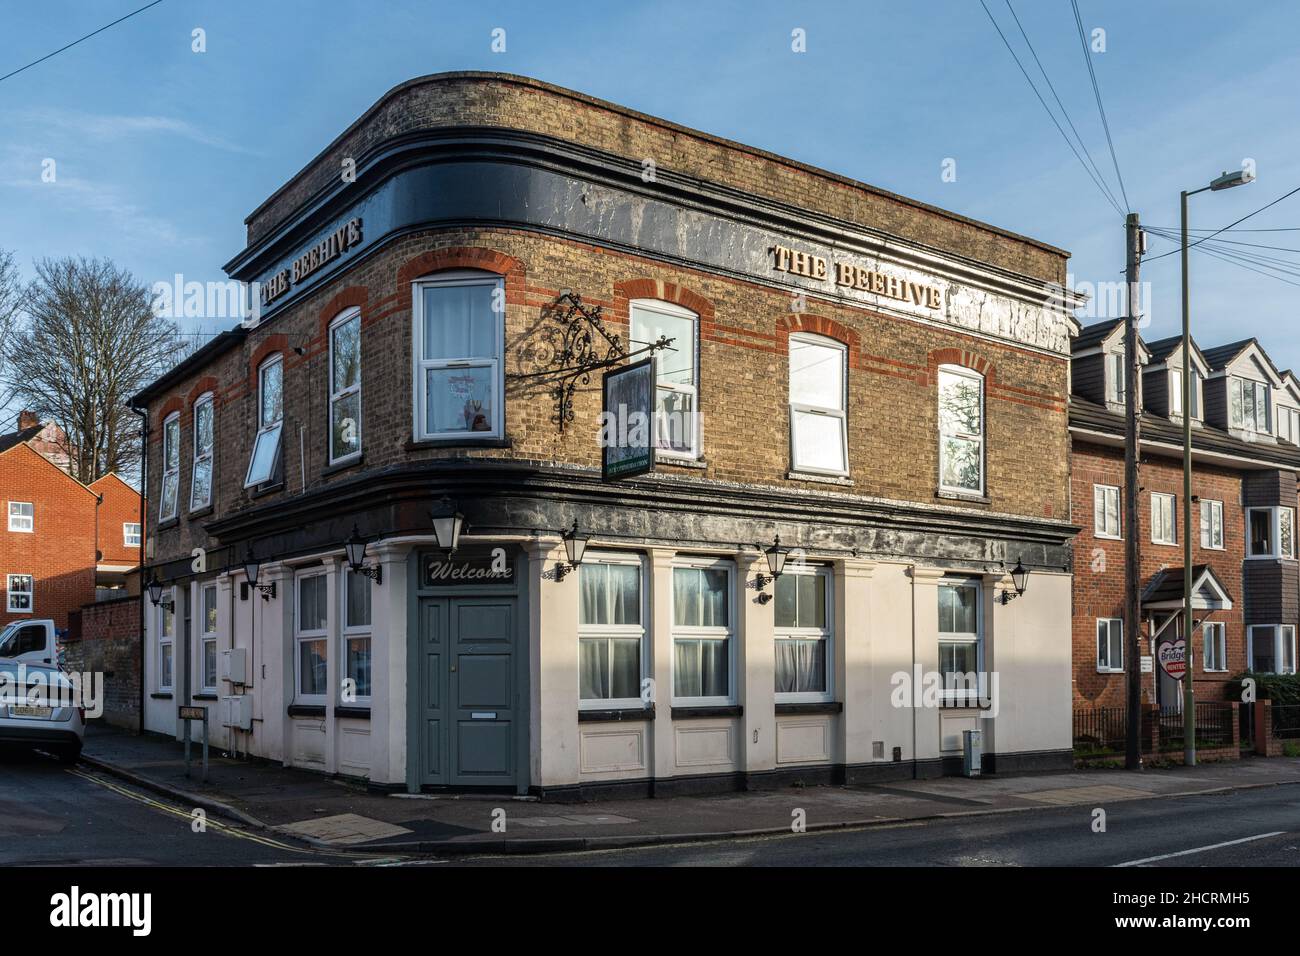 The Beehive Pub in Aldershot, Hampshire, England, UK. Old architectural style pub, permanently closed in 2014. Stock Photo